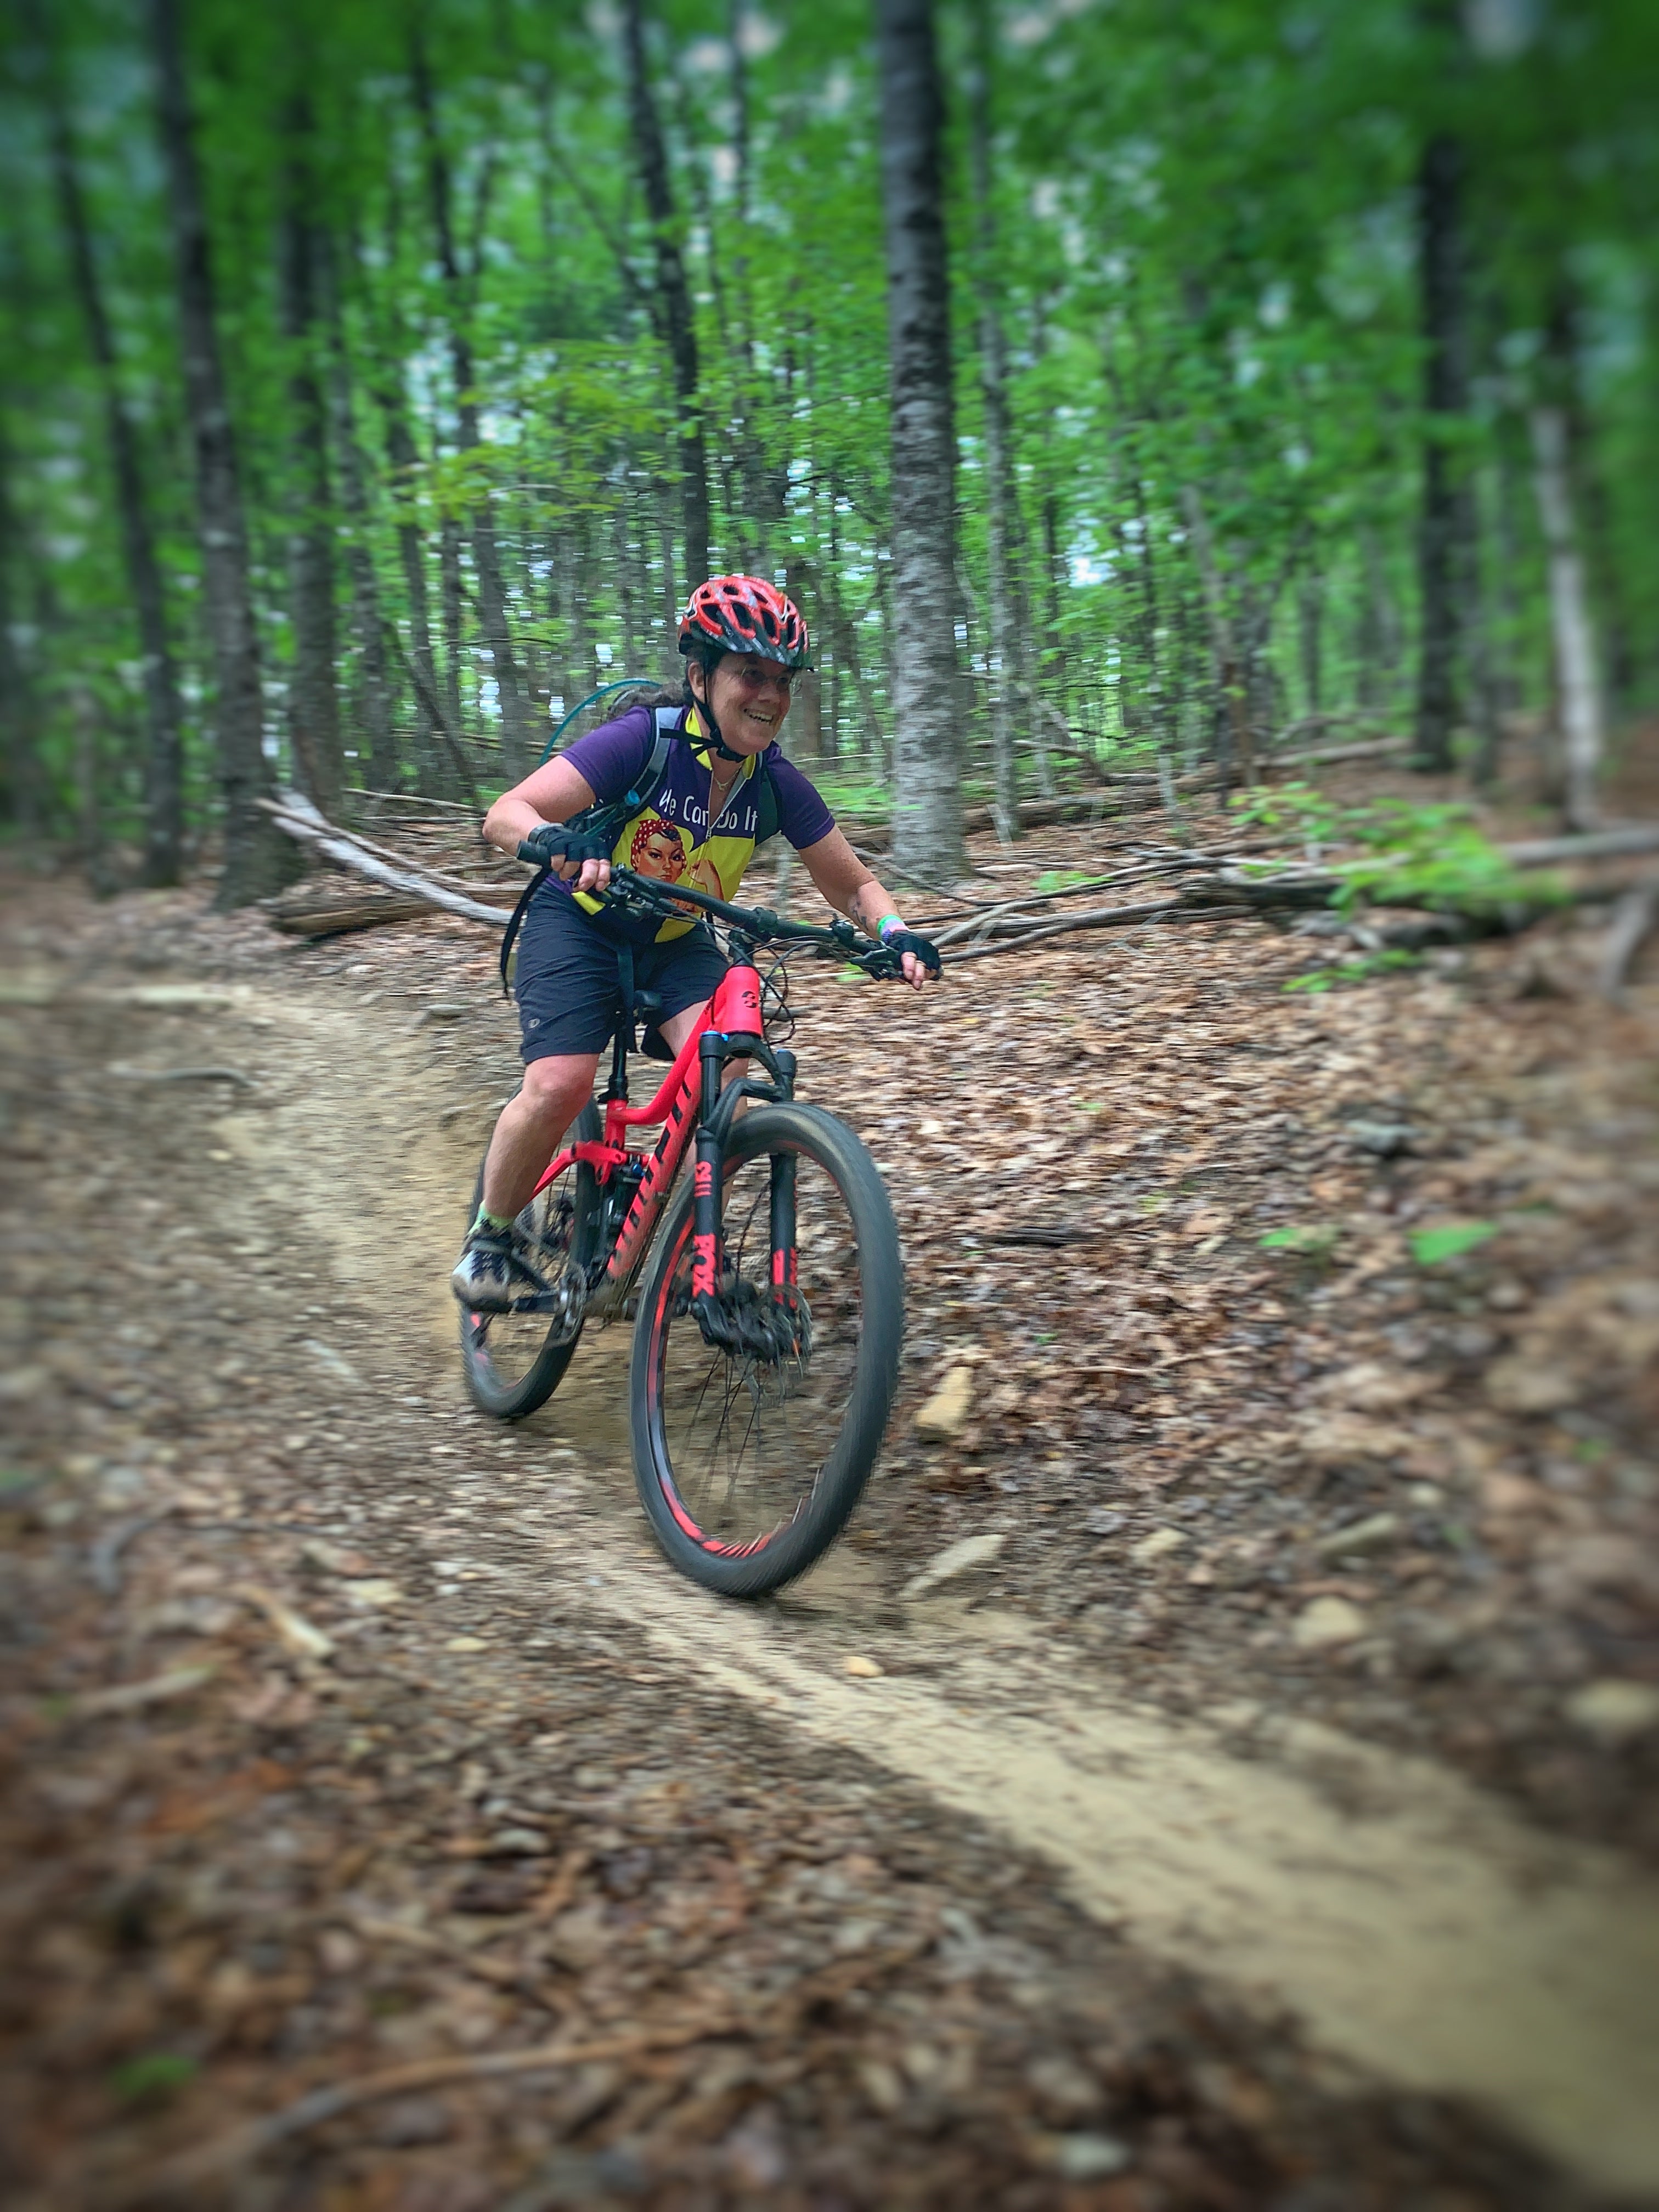 Beginner to advanced riding options on one of several mountain biking trails at Jackrabbit.